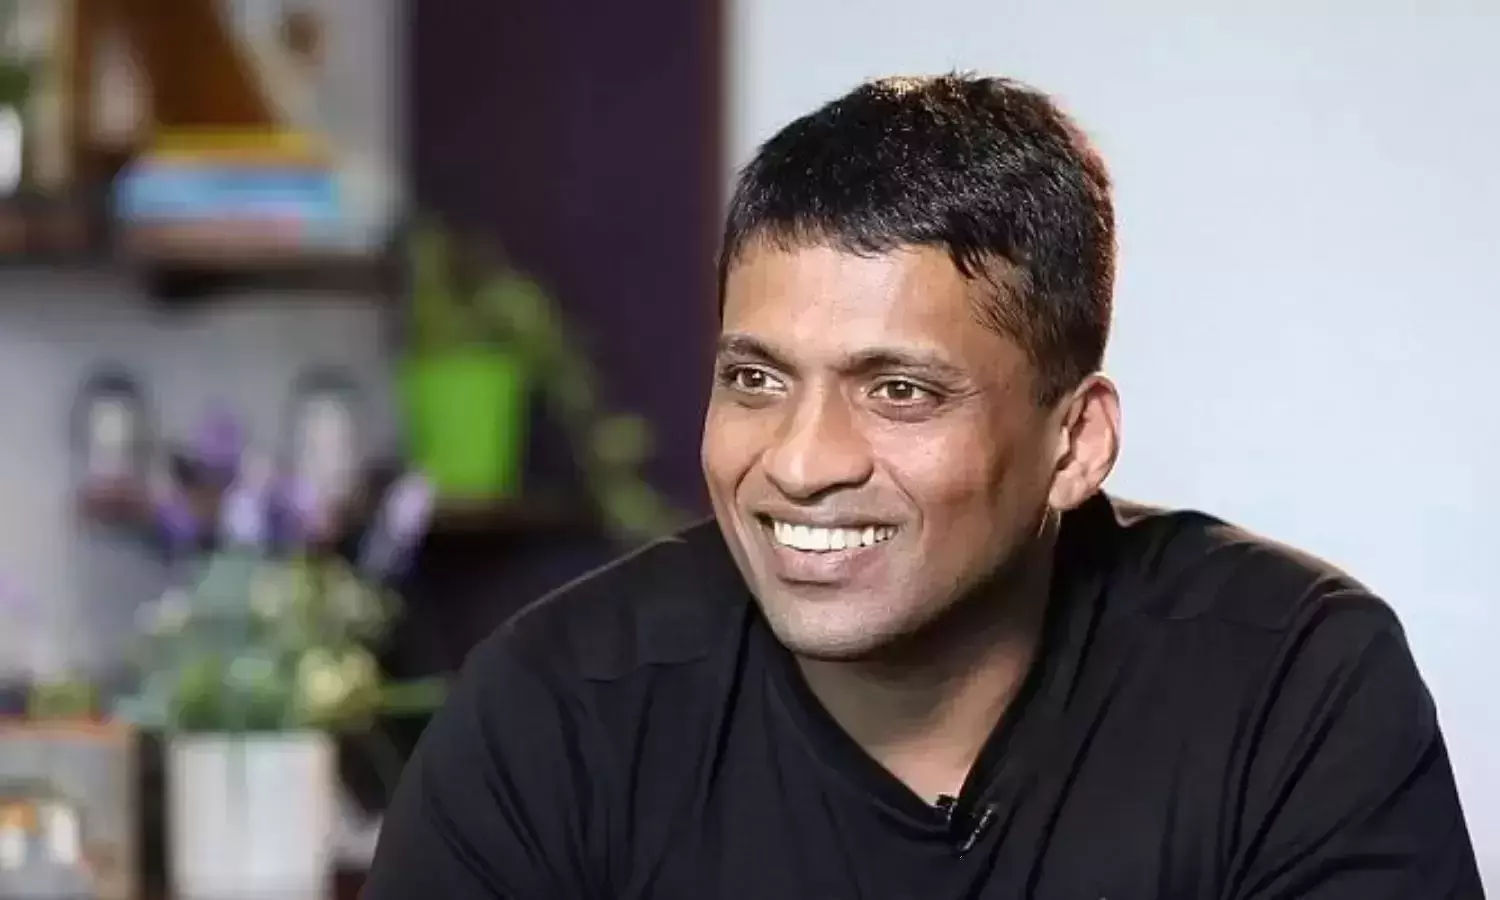 Byjus founder takes loan against his home to pay salary: Report